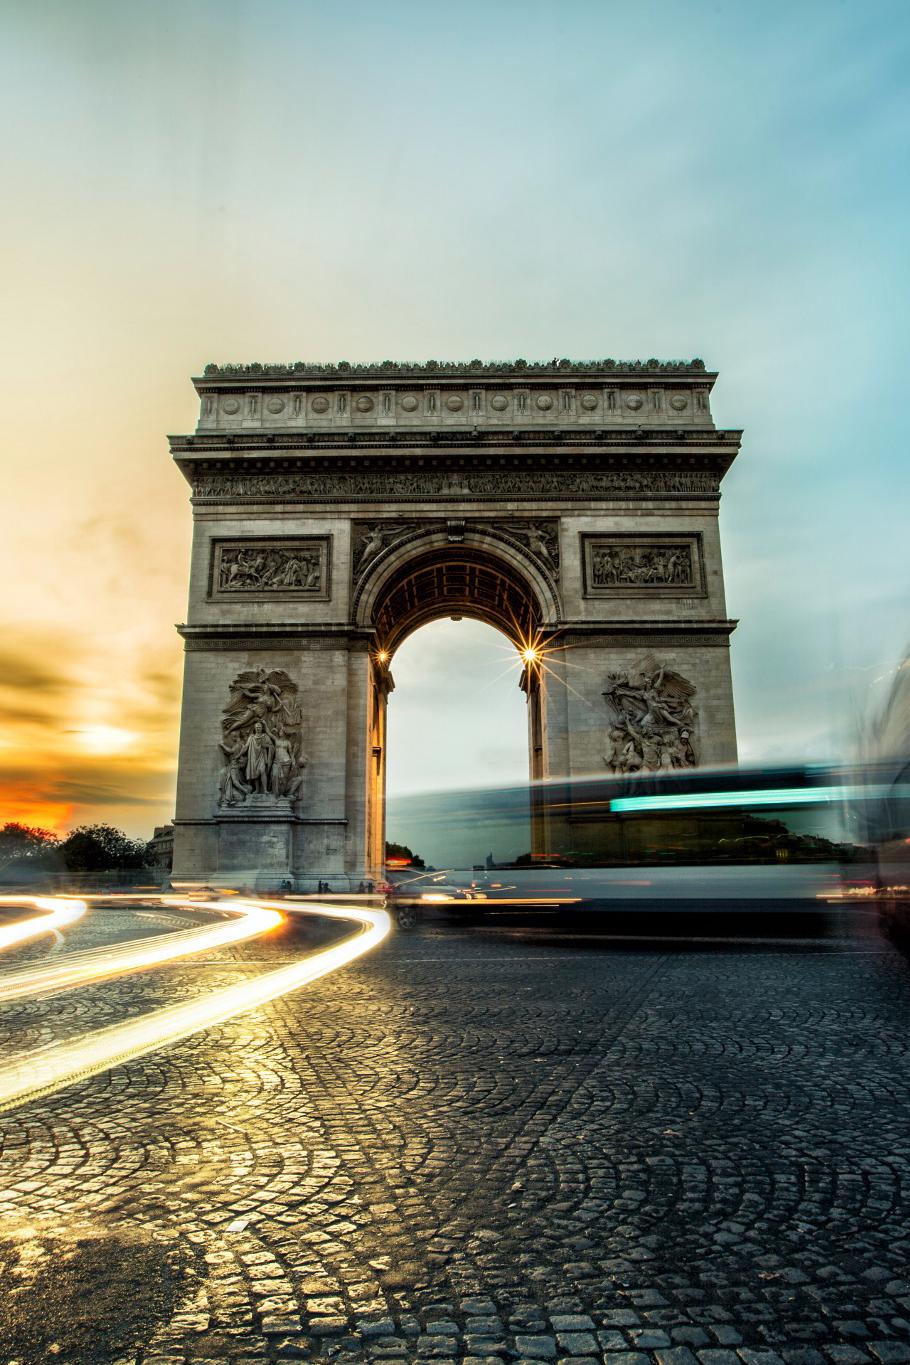 Mobile HD Wallpapers | ARC DE TRIOMPHE SUNSET - Mobile HD Wallpapers